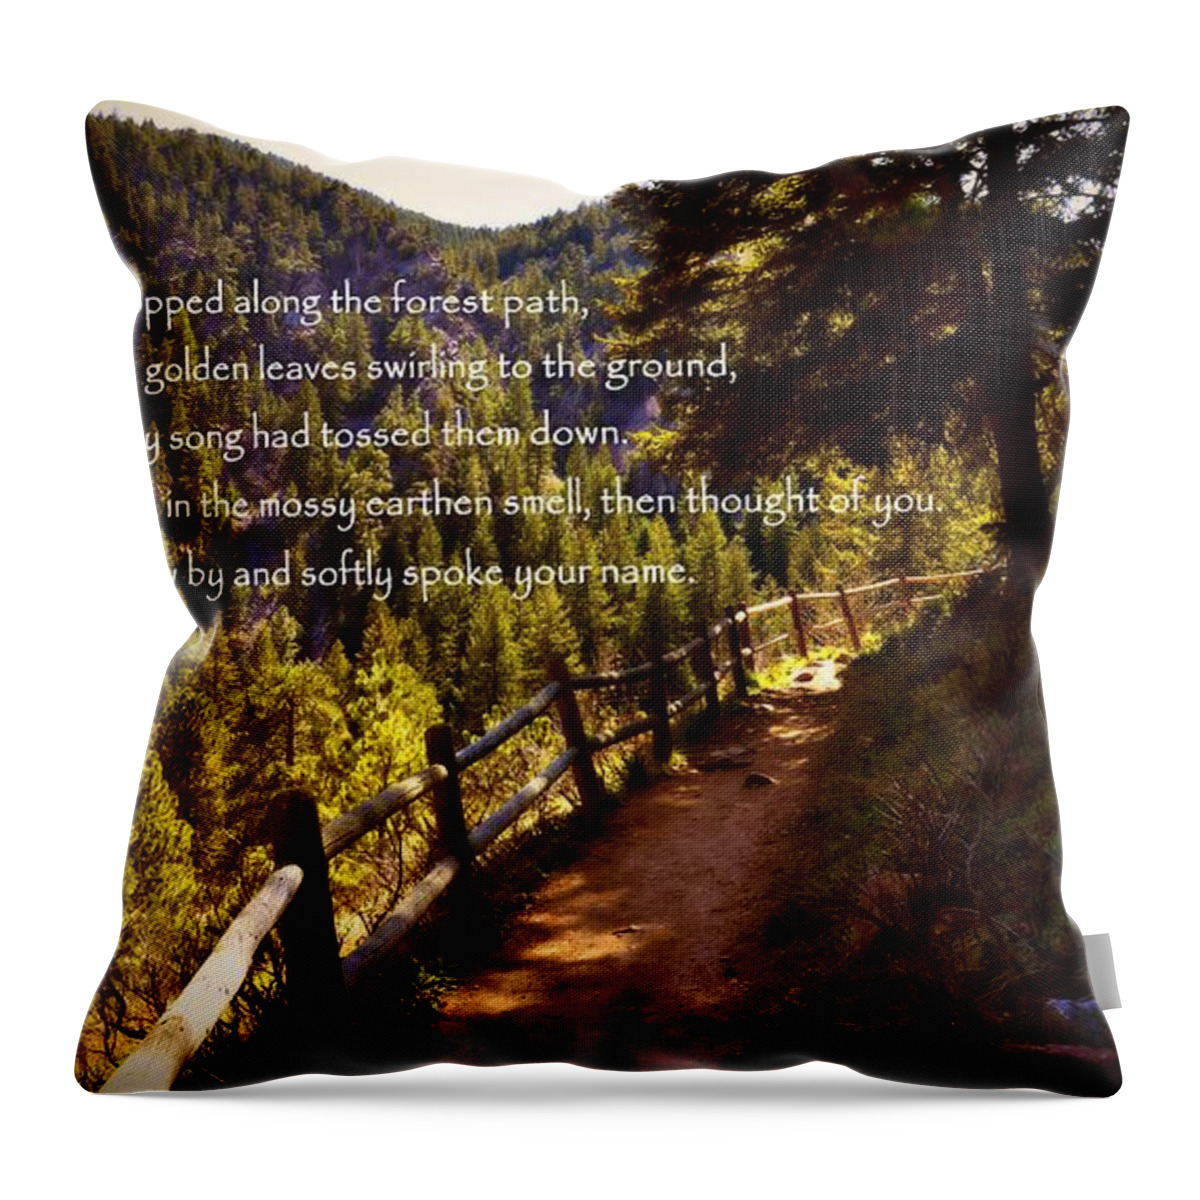 Forest Landscape Throw Pillow featuring the photograph Colorado Forest Path by Marysue Ryan